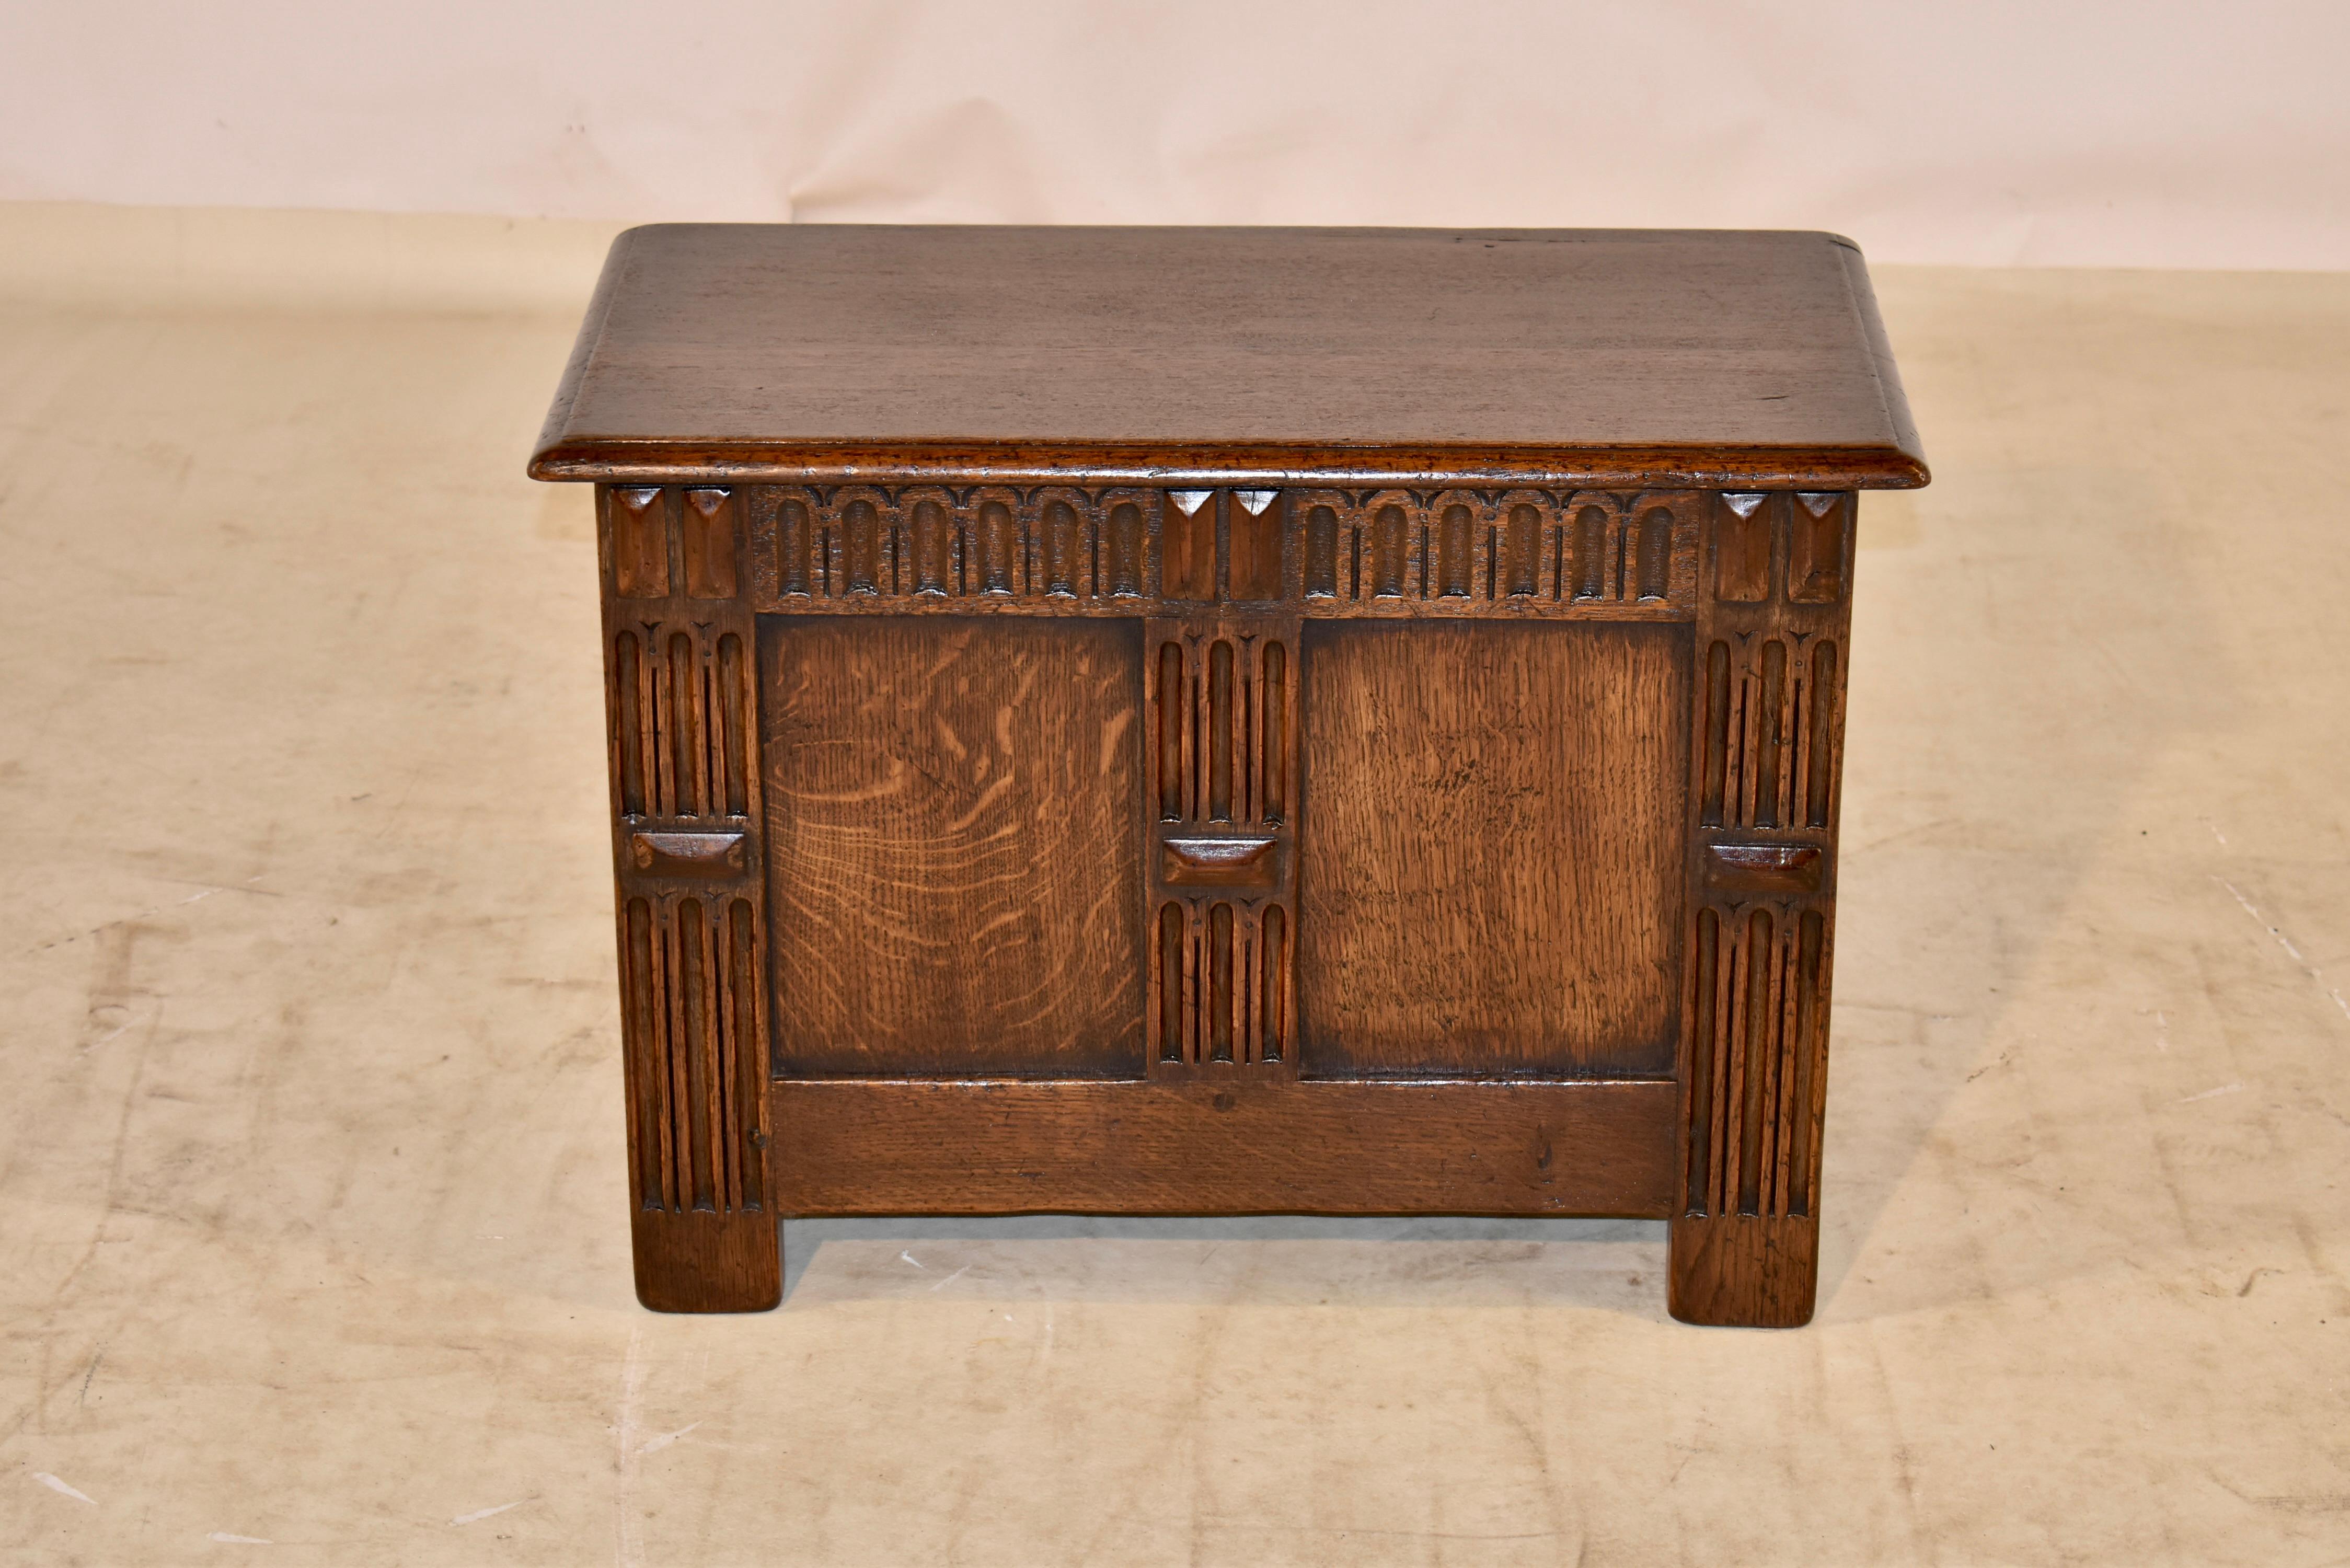 Period Edwardian oak small coffee from England with a lift top which has a lovely beveled edge, following down to simple sides and a paneled front and back.  The top lifts to reveal storage, and the piece is carved decorated in the front for added